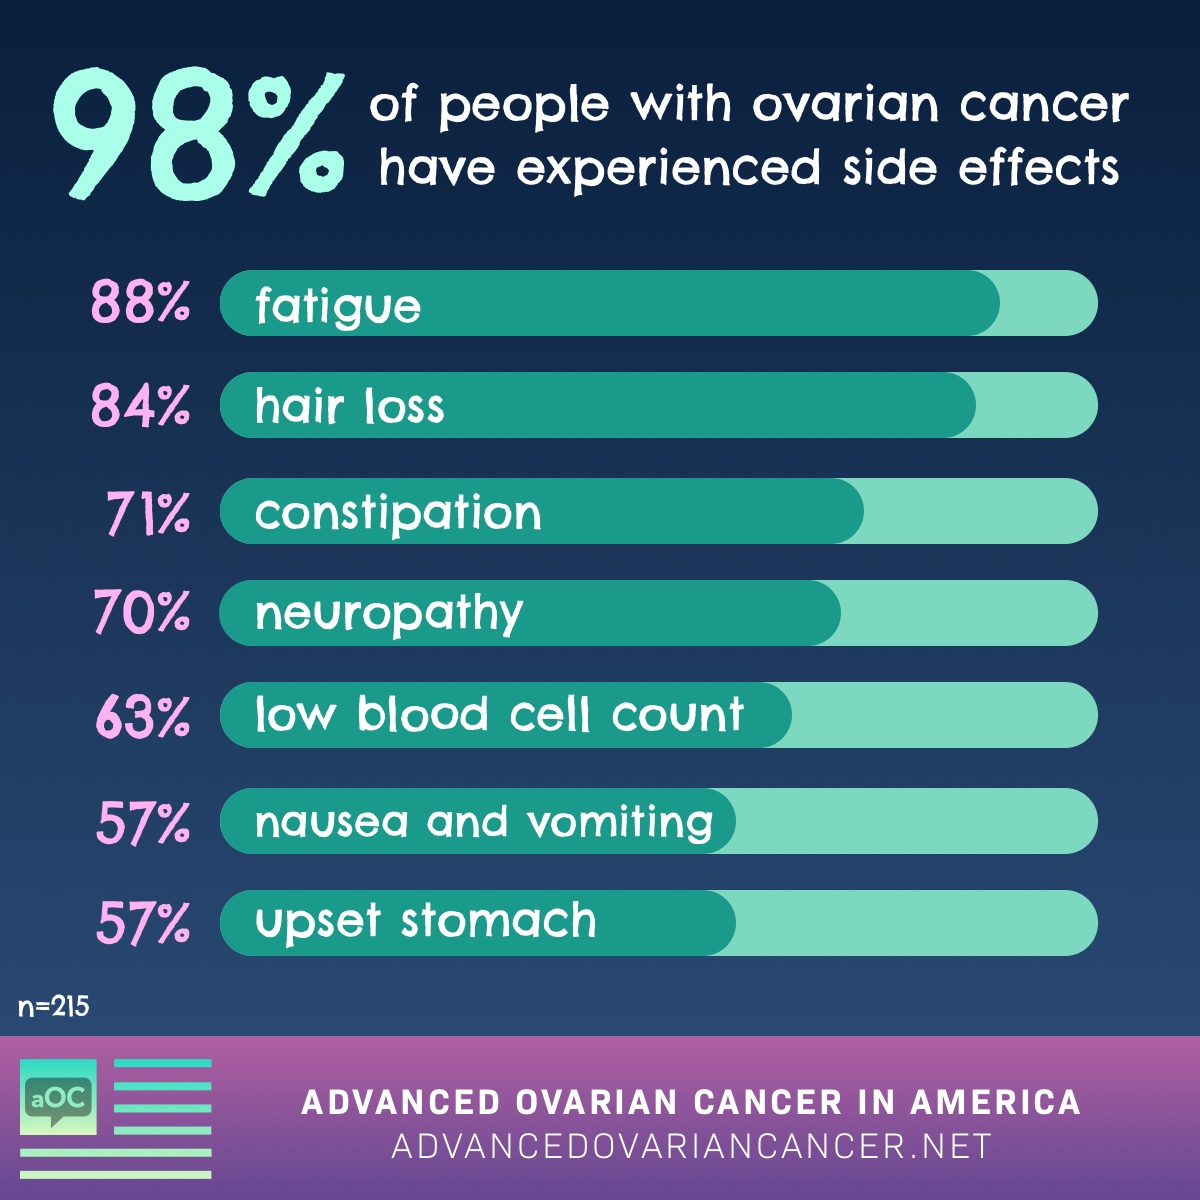 98% of people with ovarian cancer have experienced side effects. 88% fatigue, 84% Hair loss, 71% Constipation, 70% Neuropathy, 63% Low blood cell count, 57% Nausea and vomiting, 57% Upset stomach, 56% Back pain, and 56% Bloating